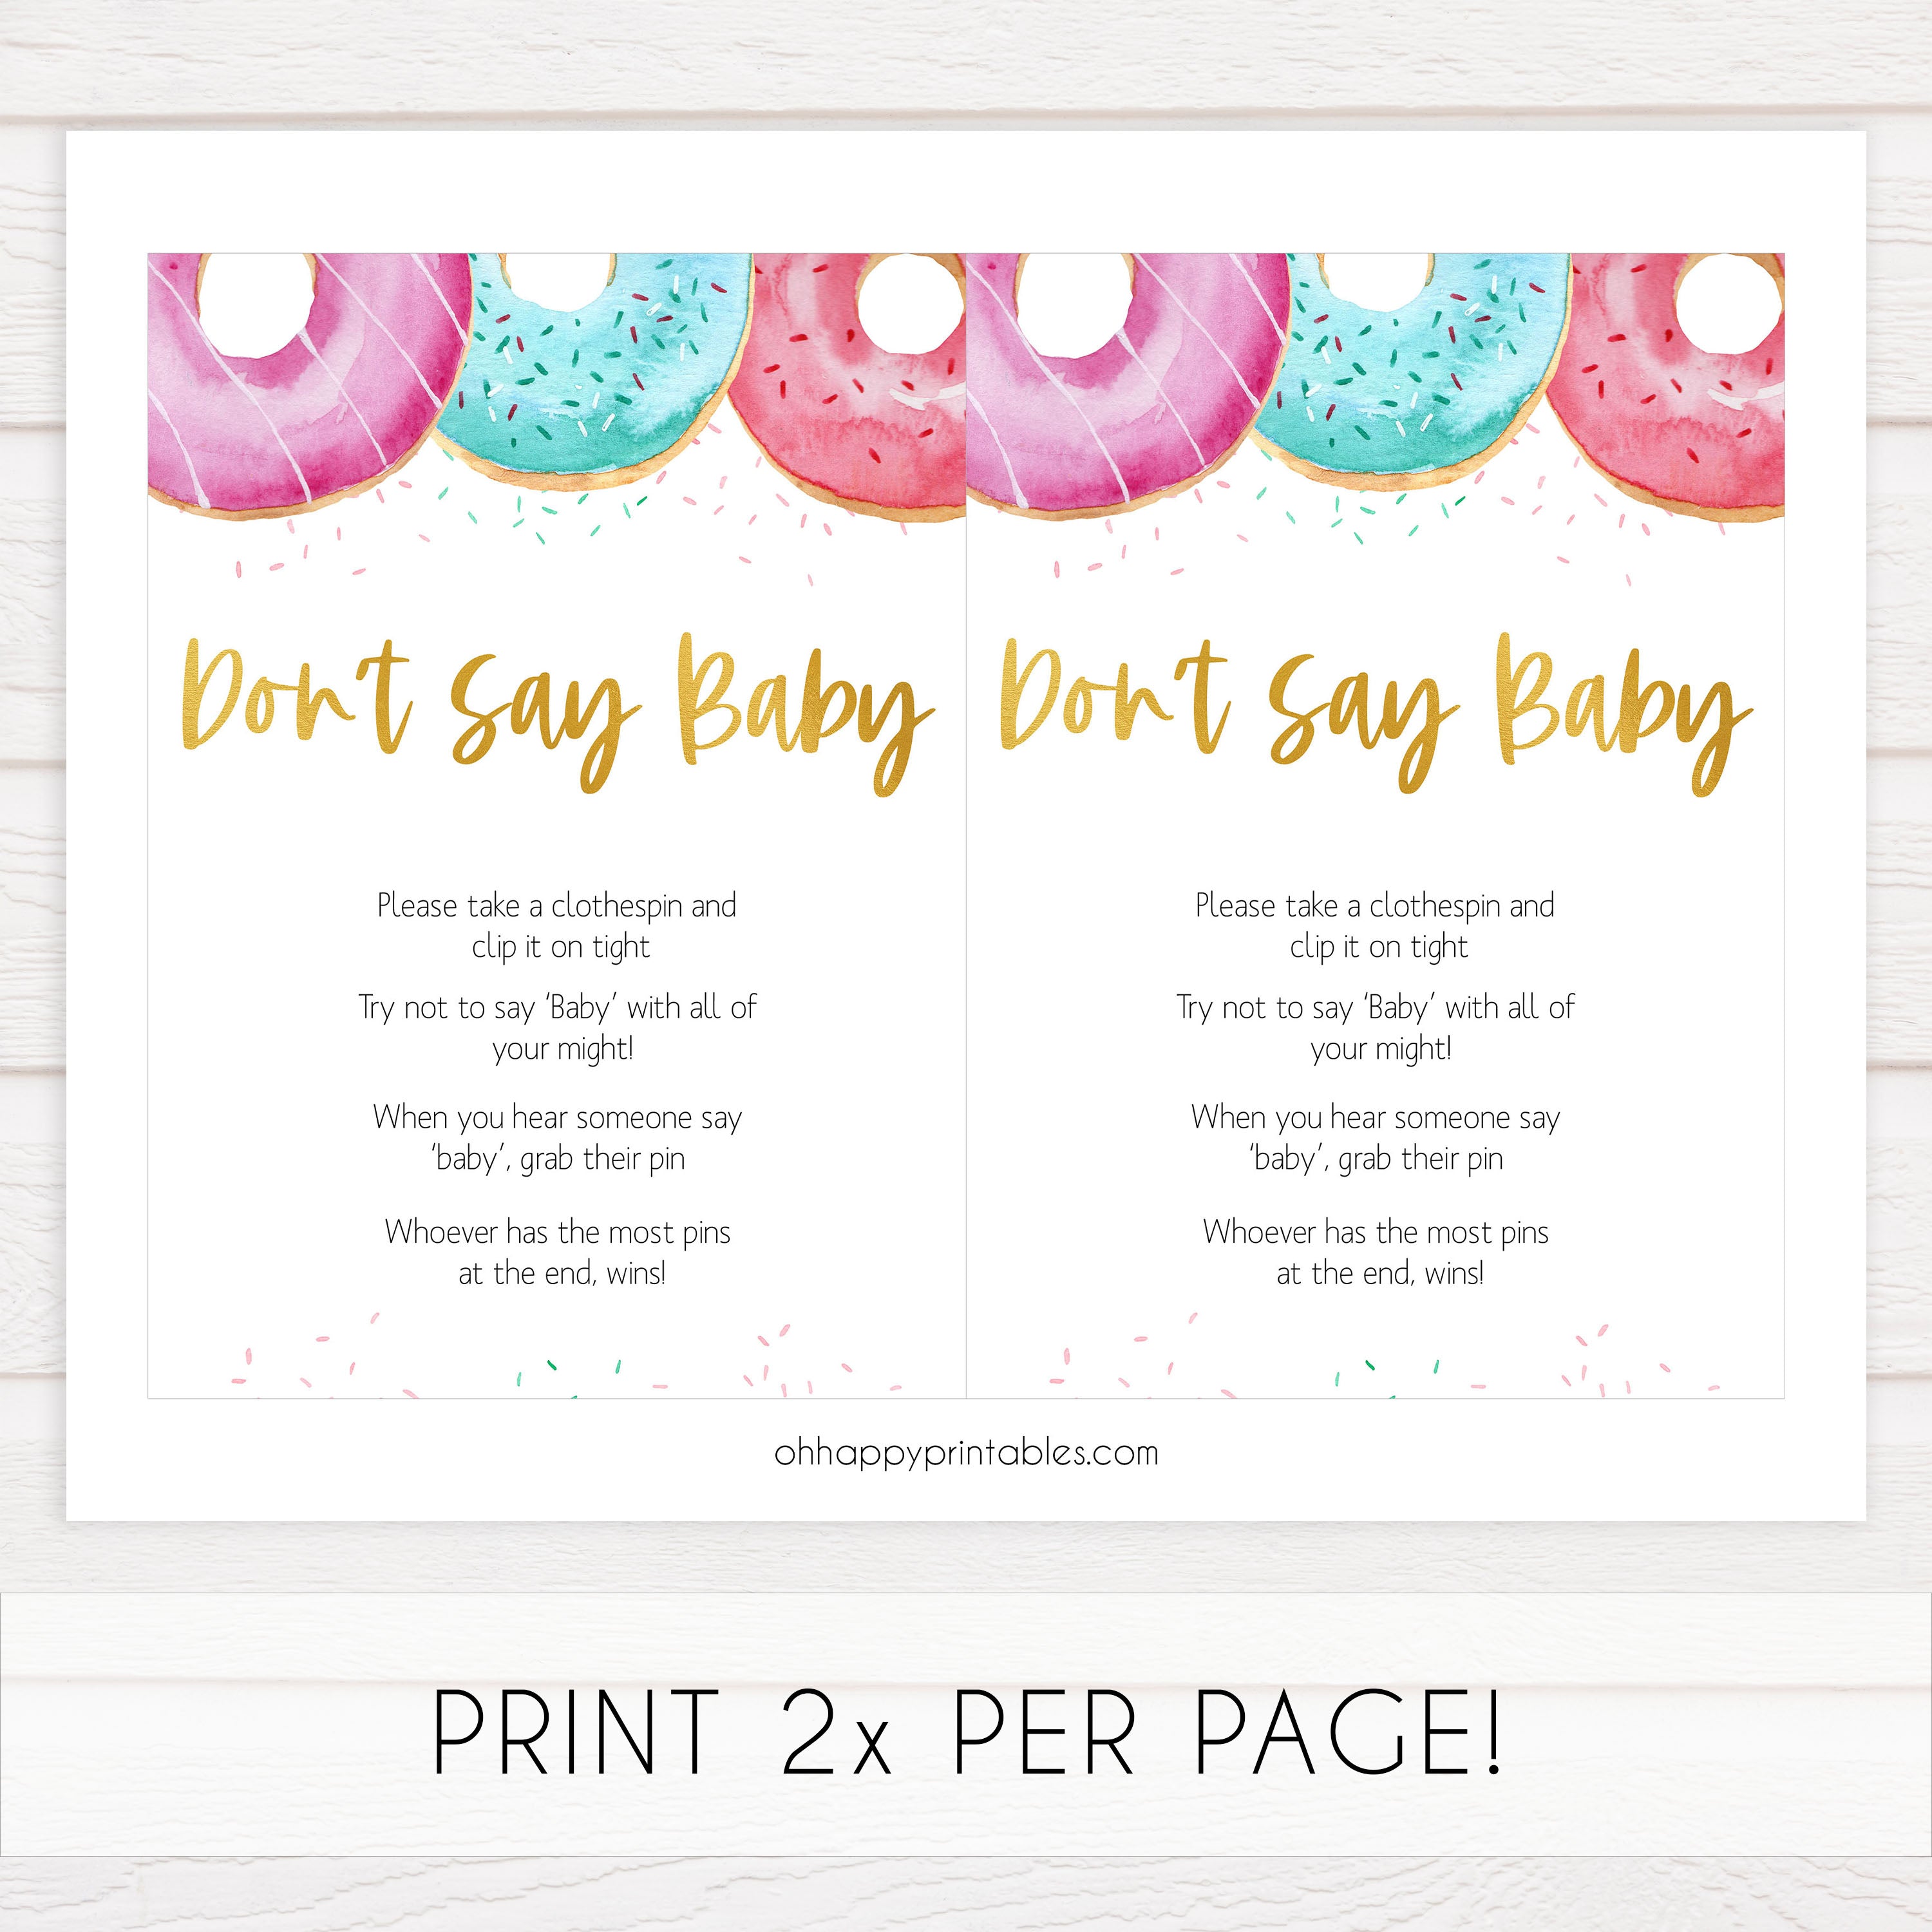 dont say baby game, Printable baby shower games, donut baby games, baby shower games, fun baby shower ideas, top baby shower ideas, donut sprinkles baby shower, baby shower games, fun donut baby shower ideas